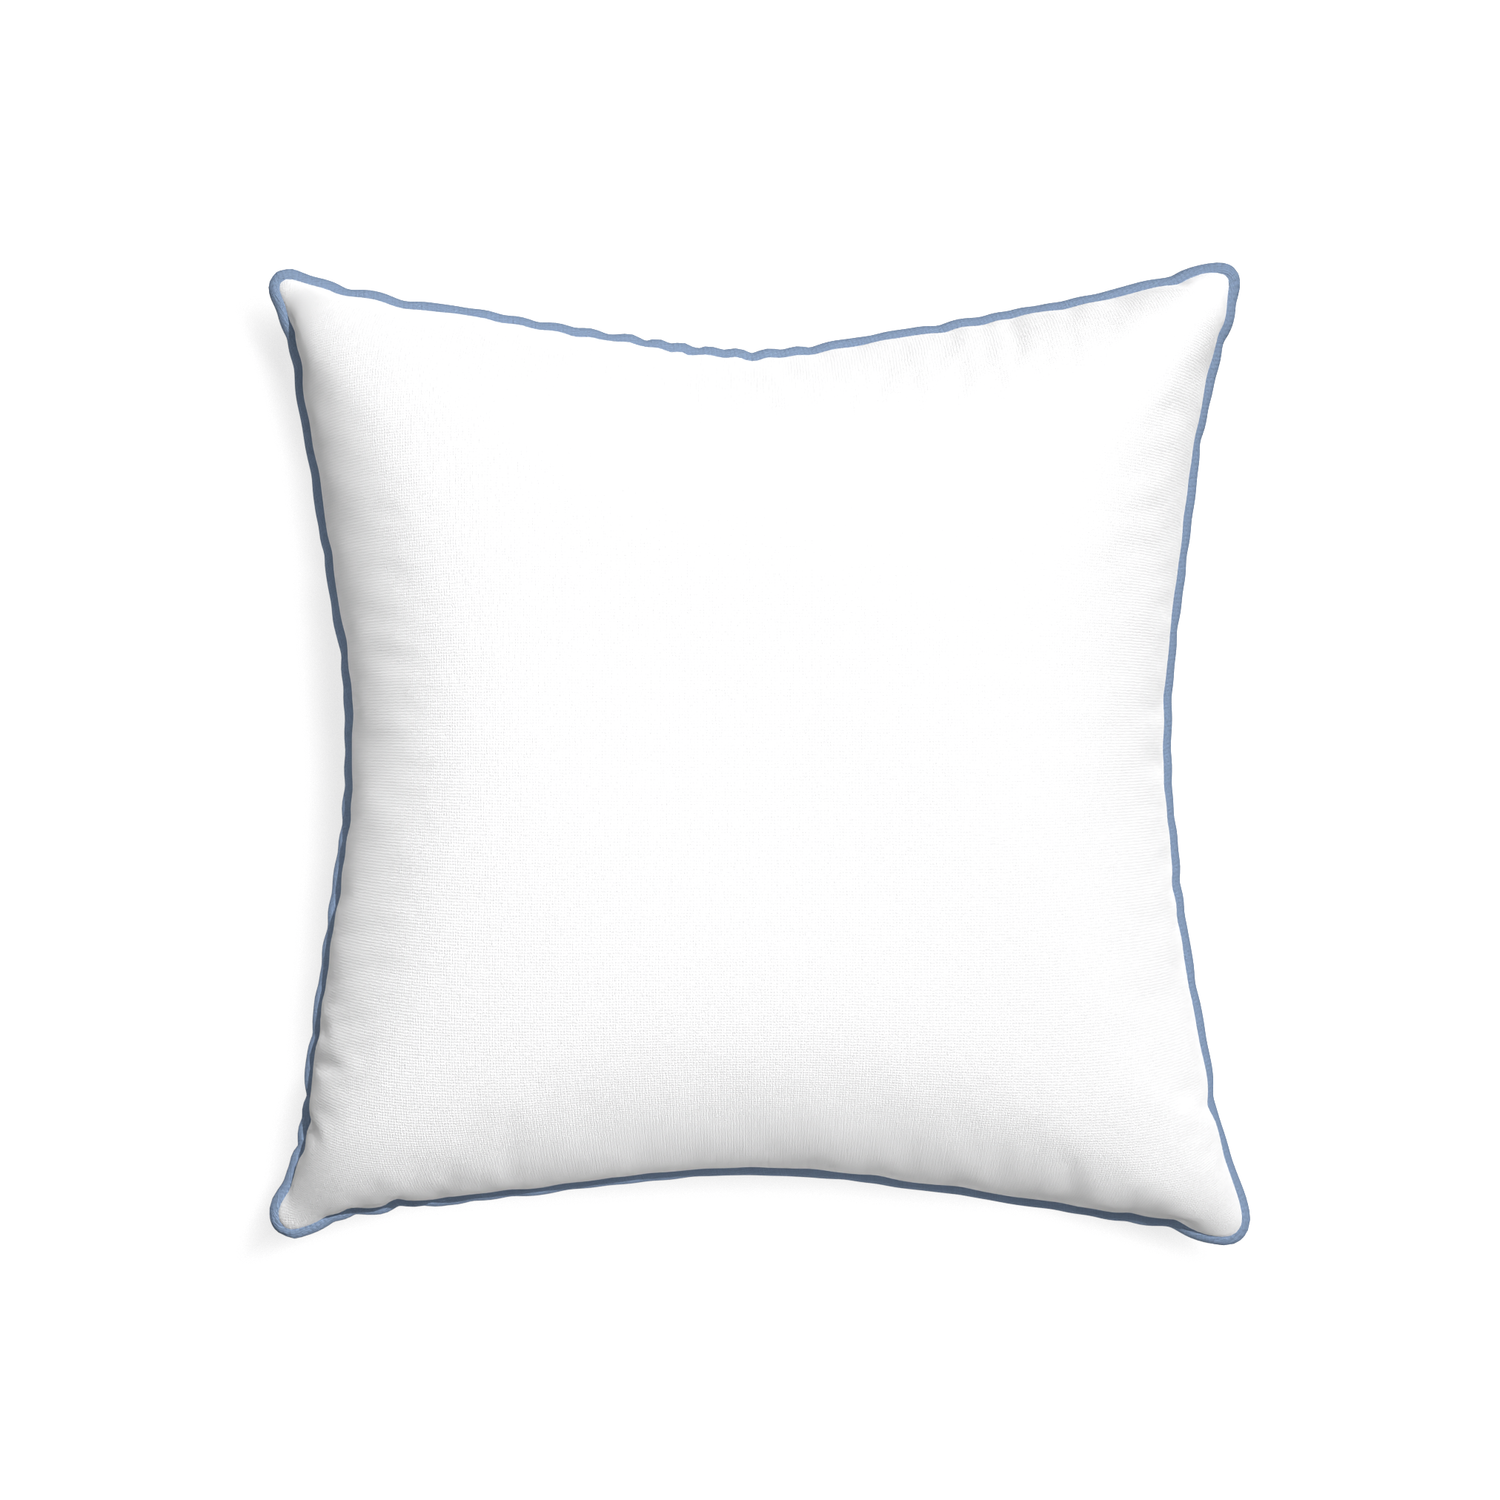 22-square snow custom white cottonpillow with sky piping on white background